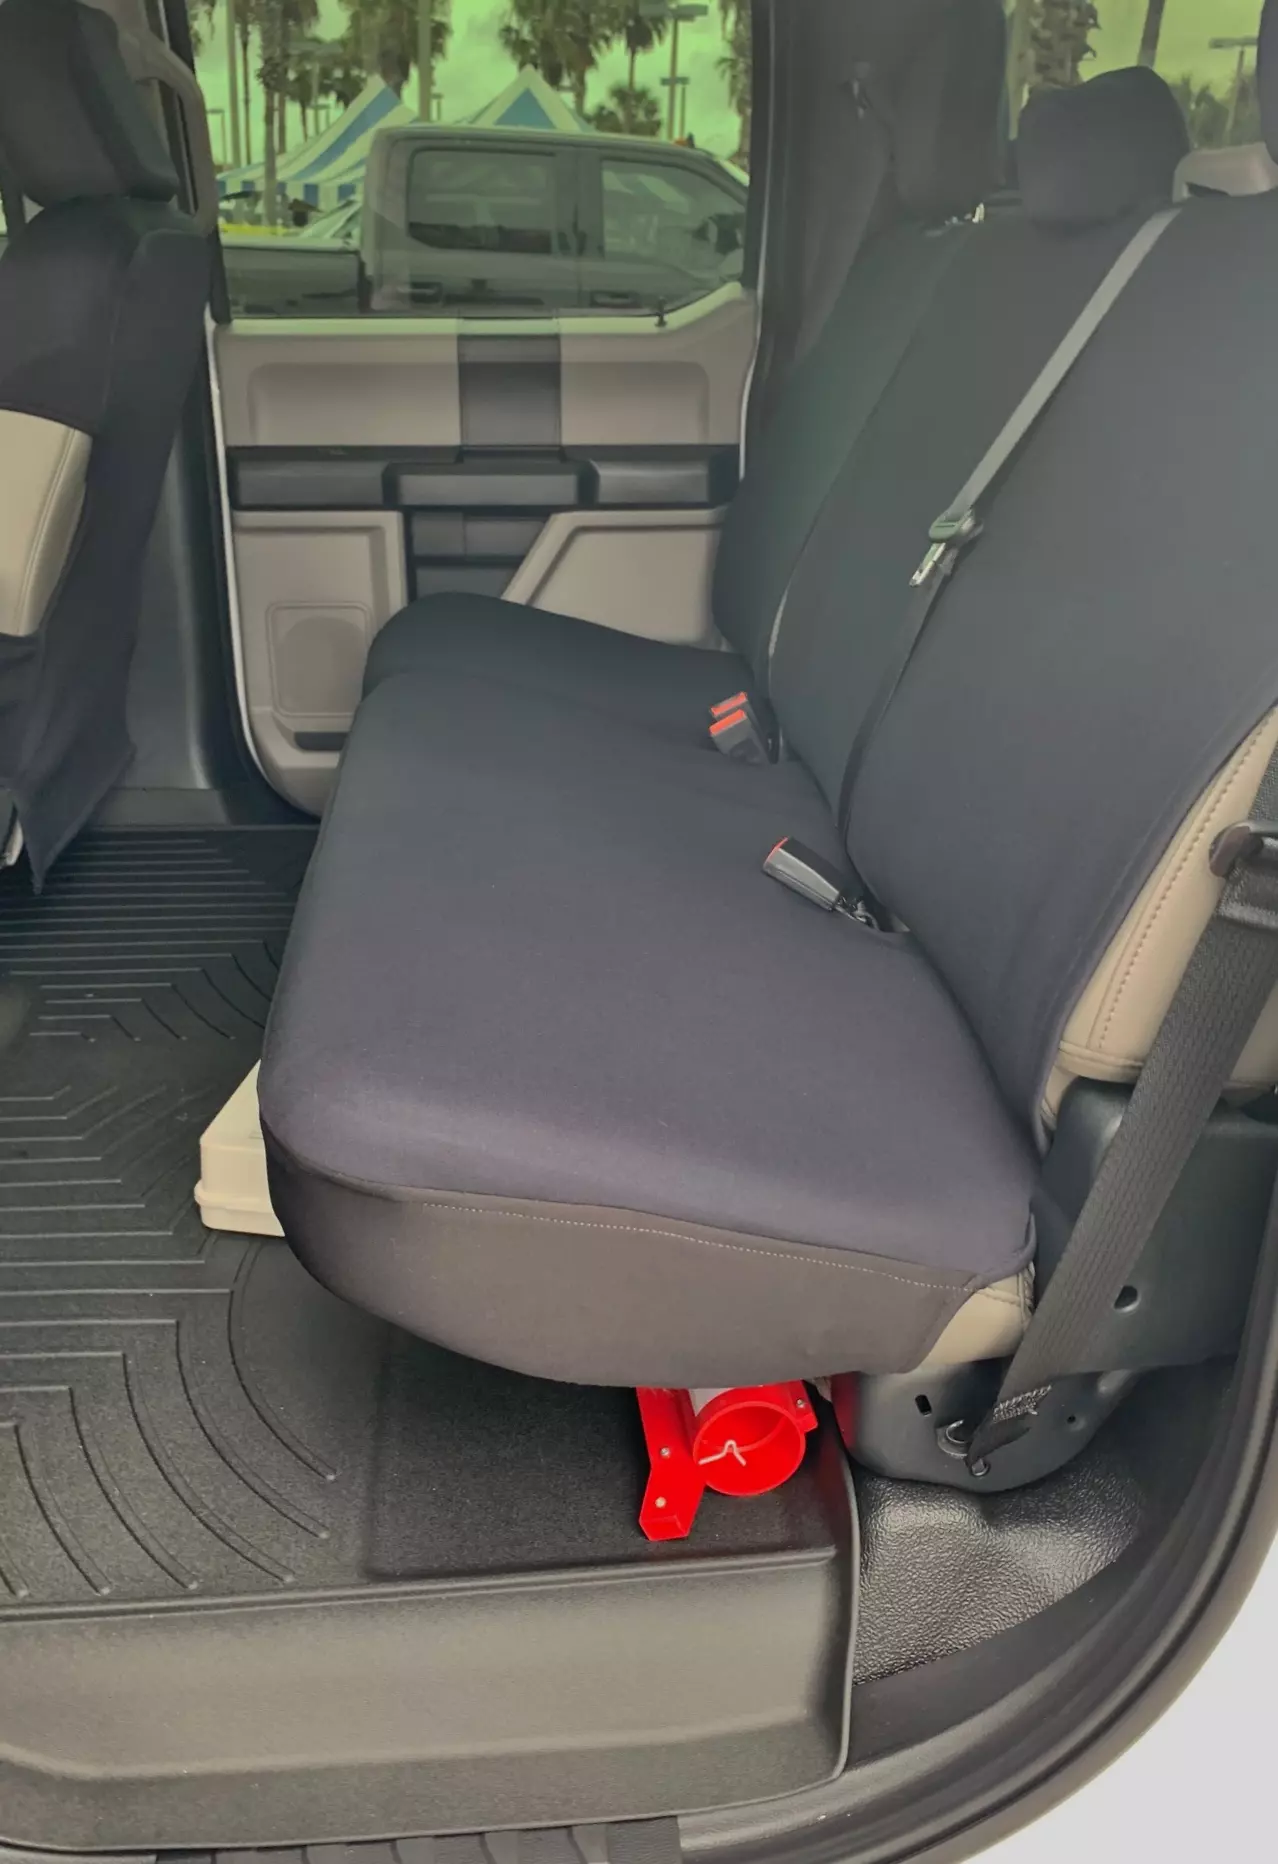 Buy Rear Split Bench Seats (Bottom only covers) fits the Ford F-Series pick-up Trucks - Neoprene Material